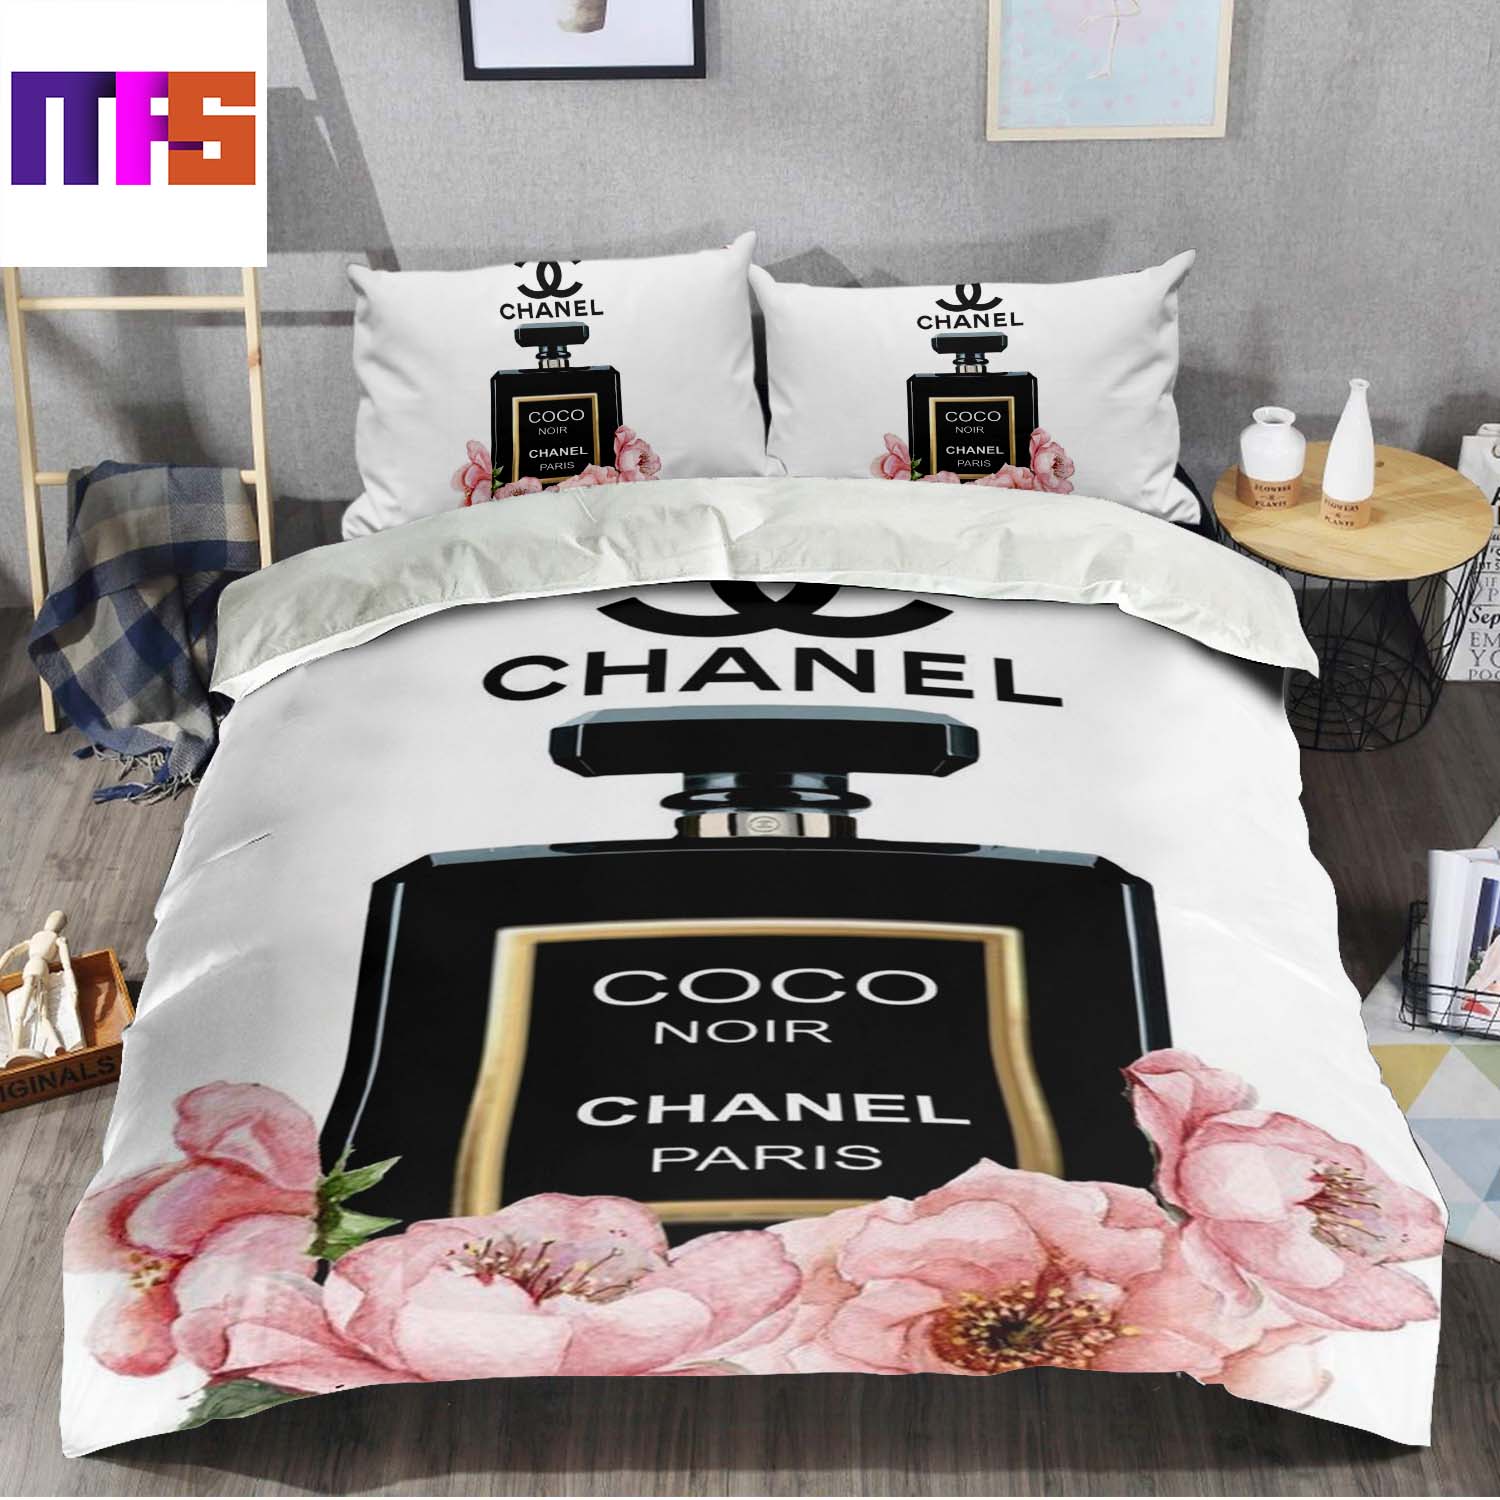 Coco Chanel Paris No.5 Black Perfume With Pink Flowers In White Background Bedding  Set Queen - Masteez